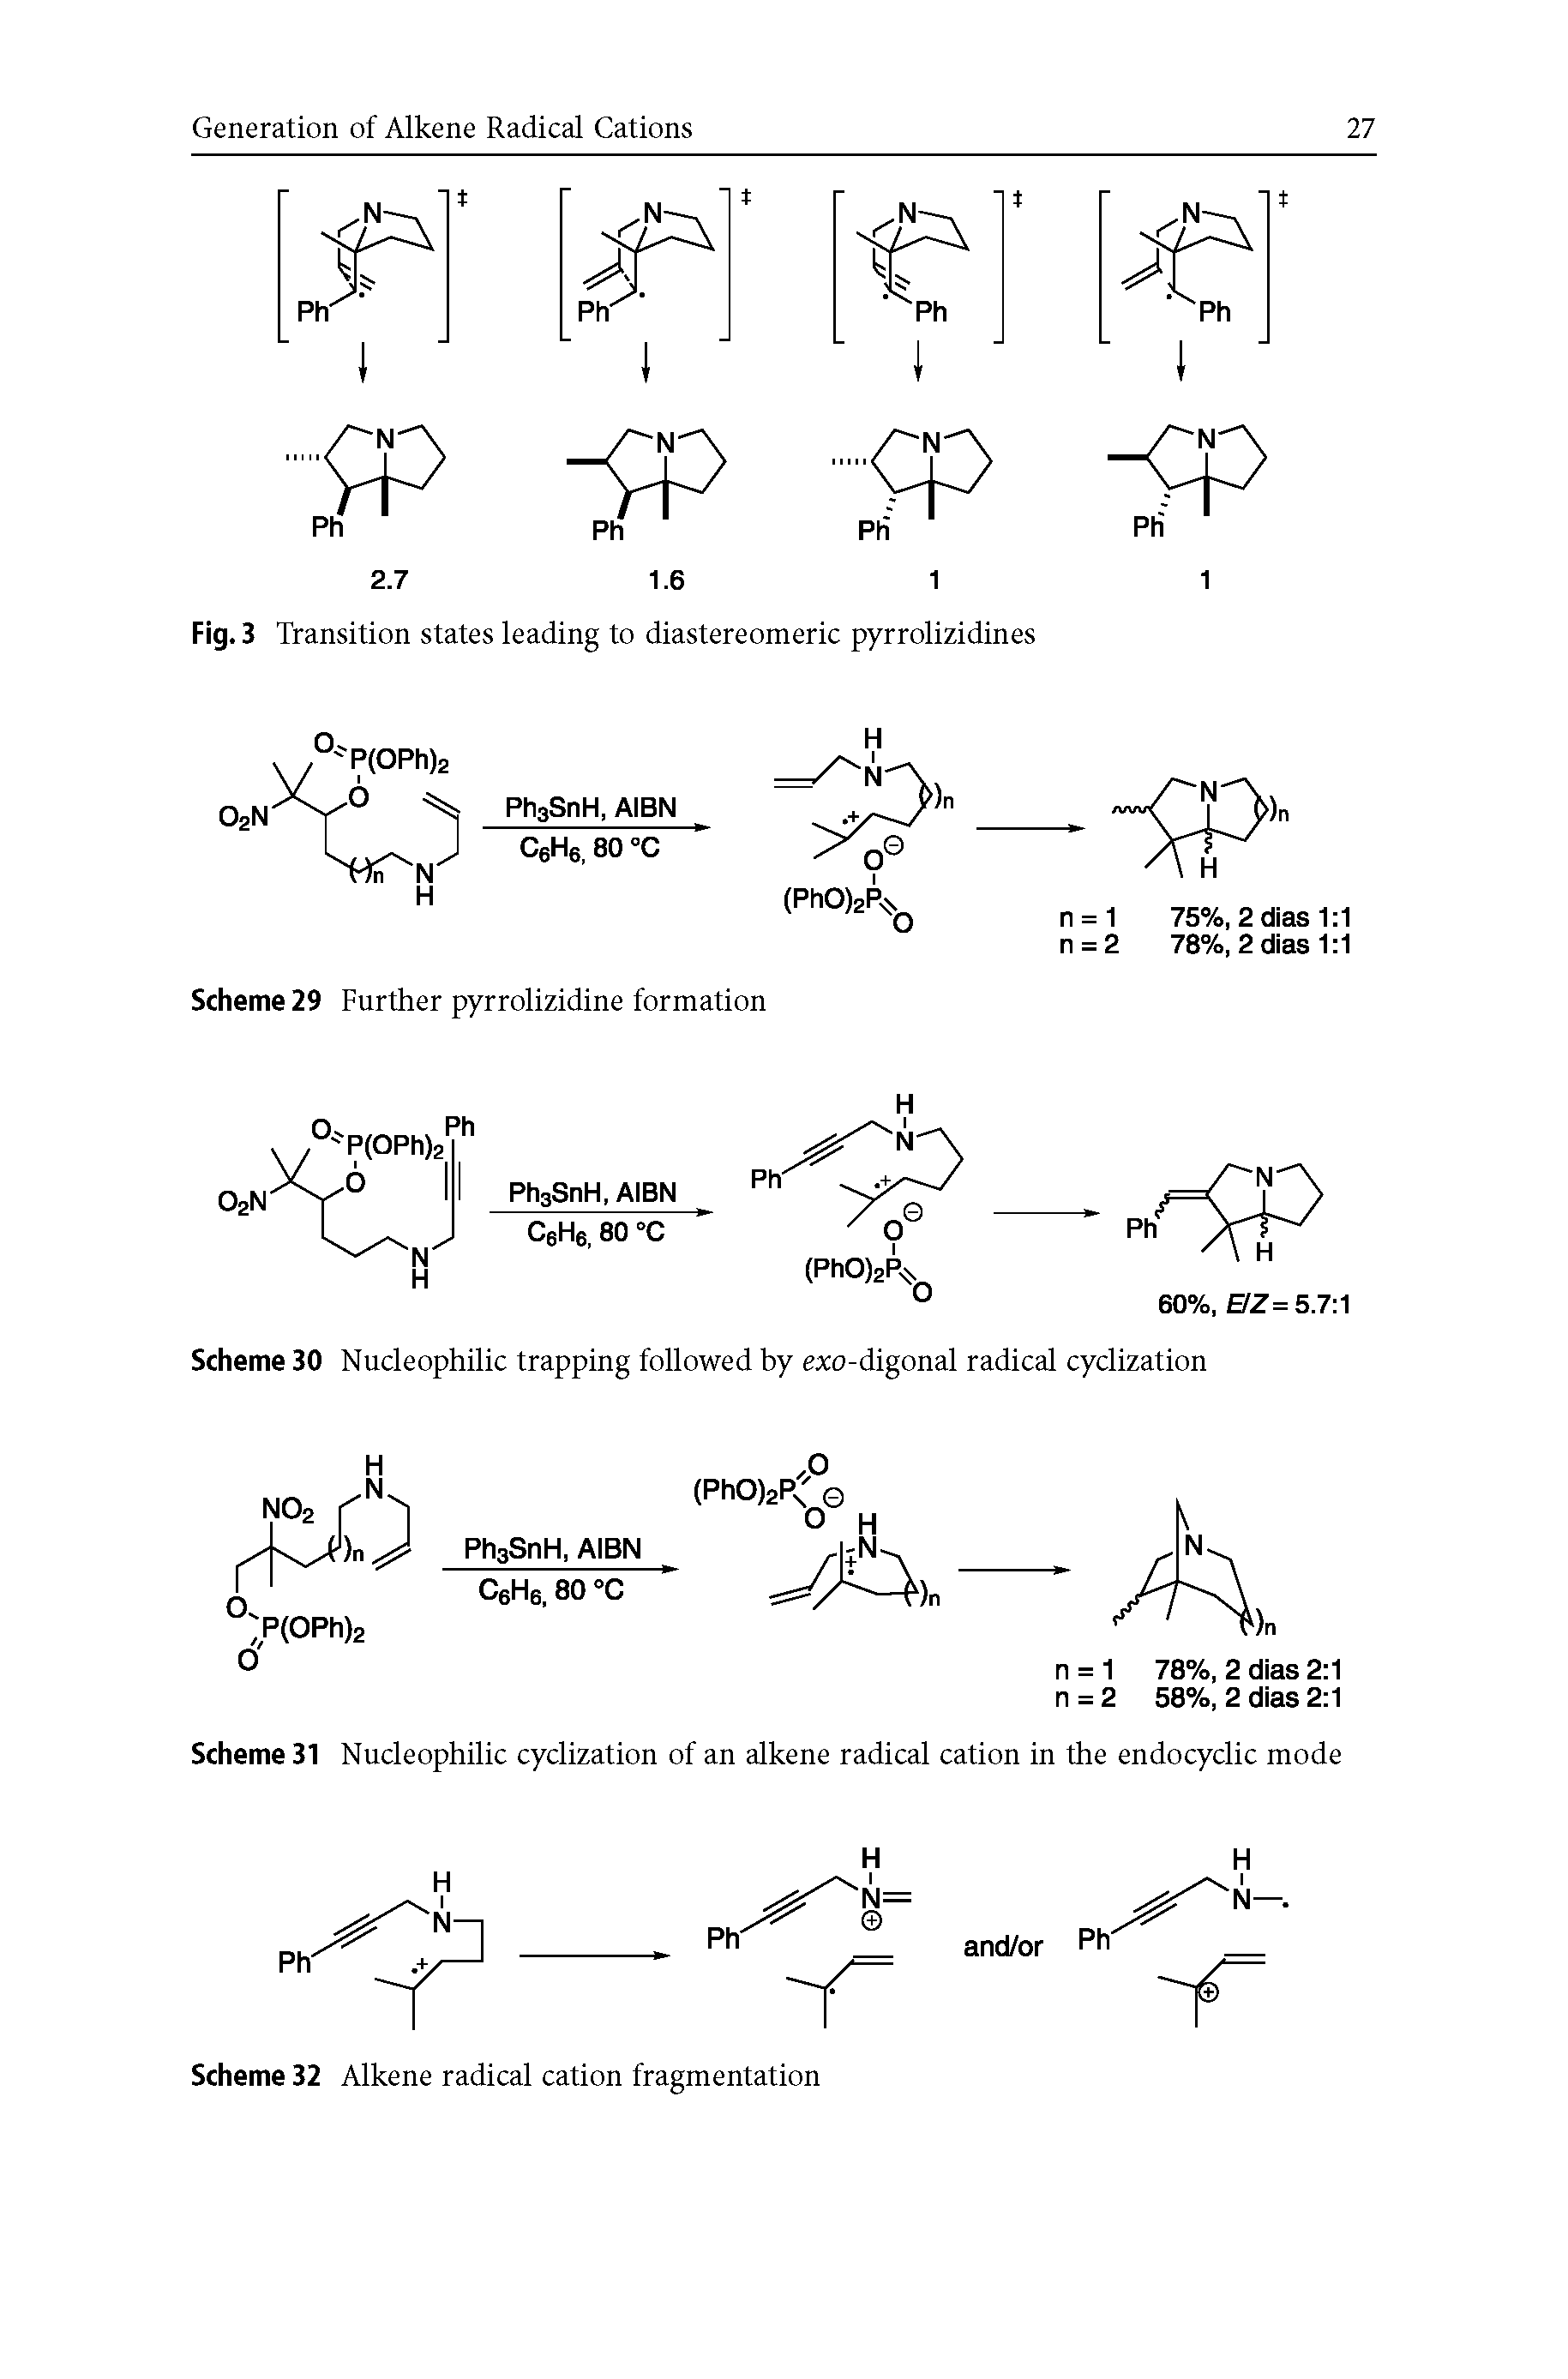 Scheme 31 Nucleophilic cyclization of an alkene radical cation in the endocyclic mode...